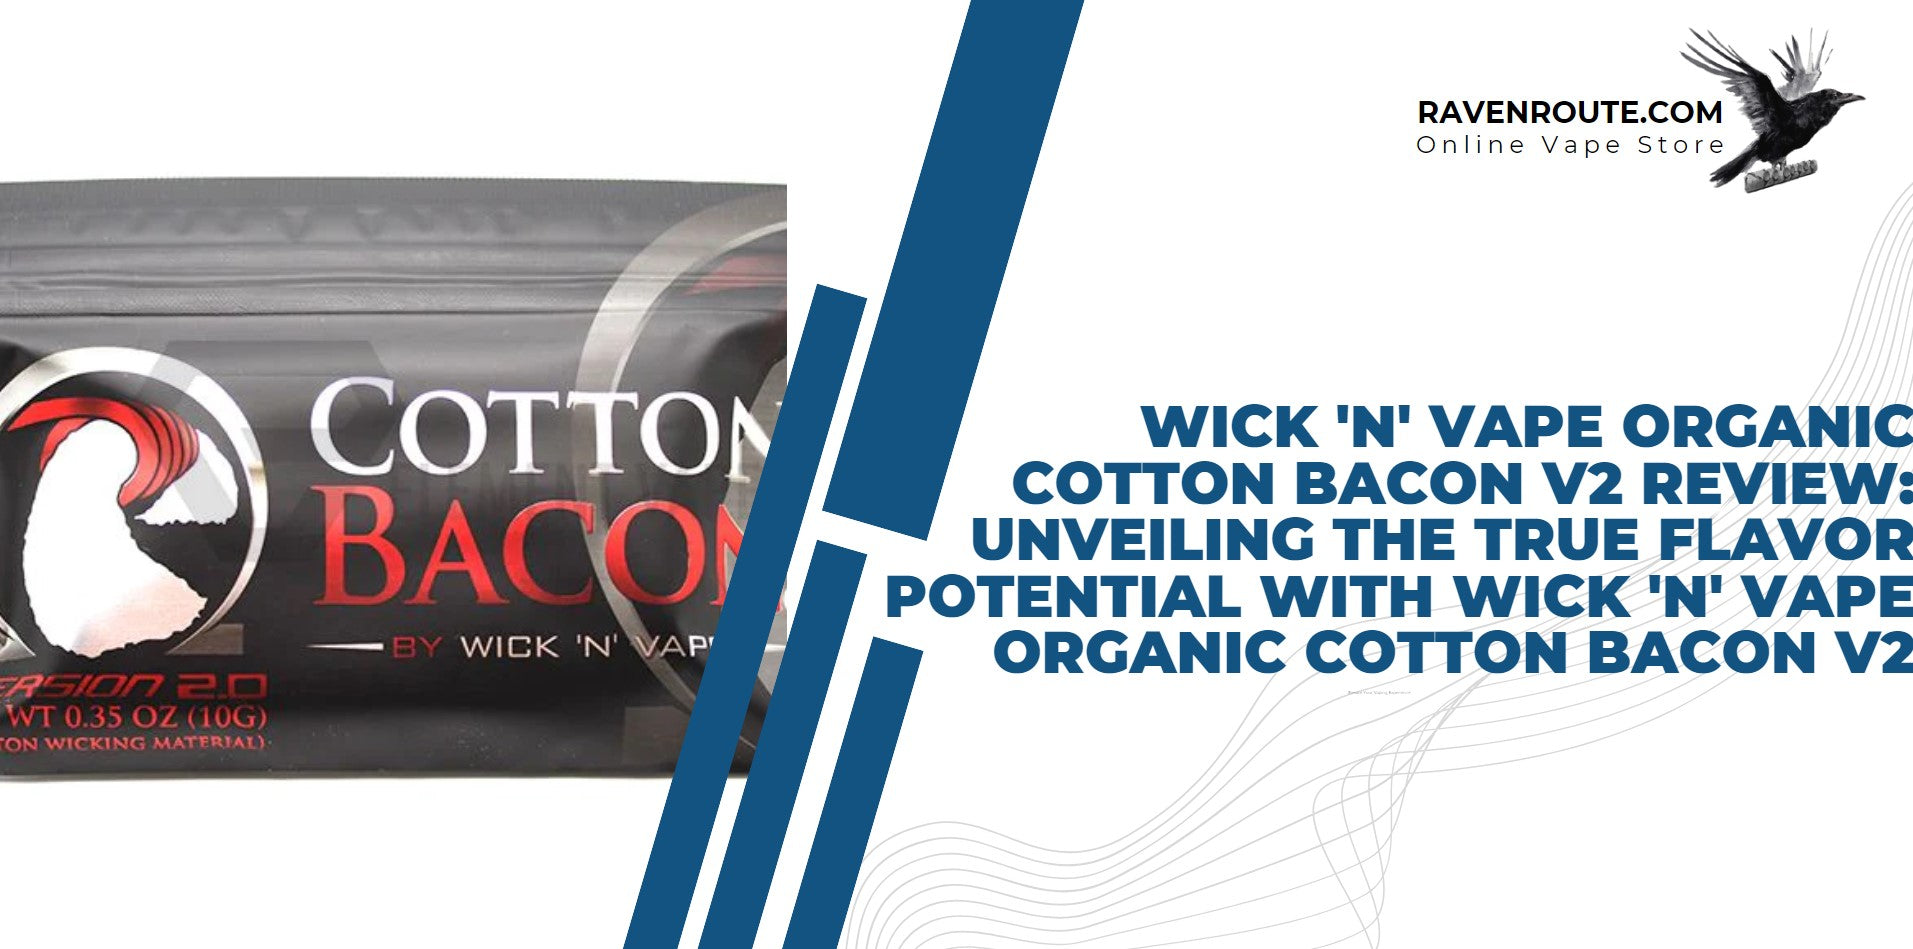 Wick 'N' Vape Organic Cotton Bacon V2 Review: Unveiling the True Flavor Potential with Wick 'N' Vape Organic Cotton Bacon V2